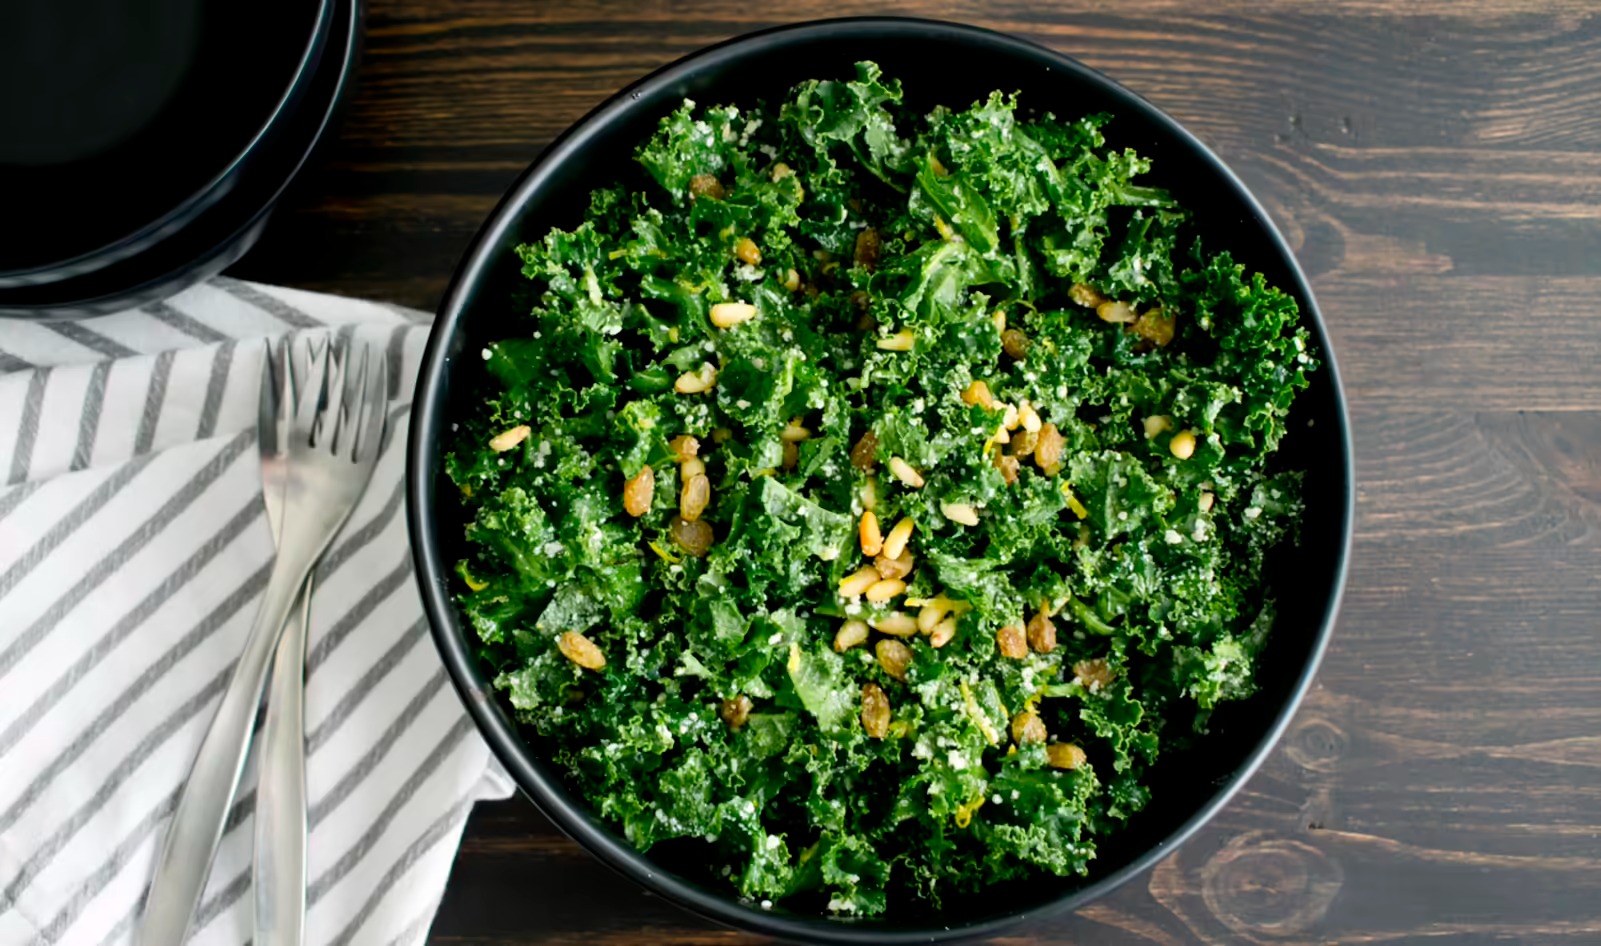 Study Finds PFAS in Kale. Should You Stop Eating It? Here’s What You Need to Know